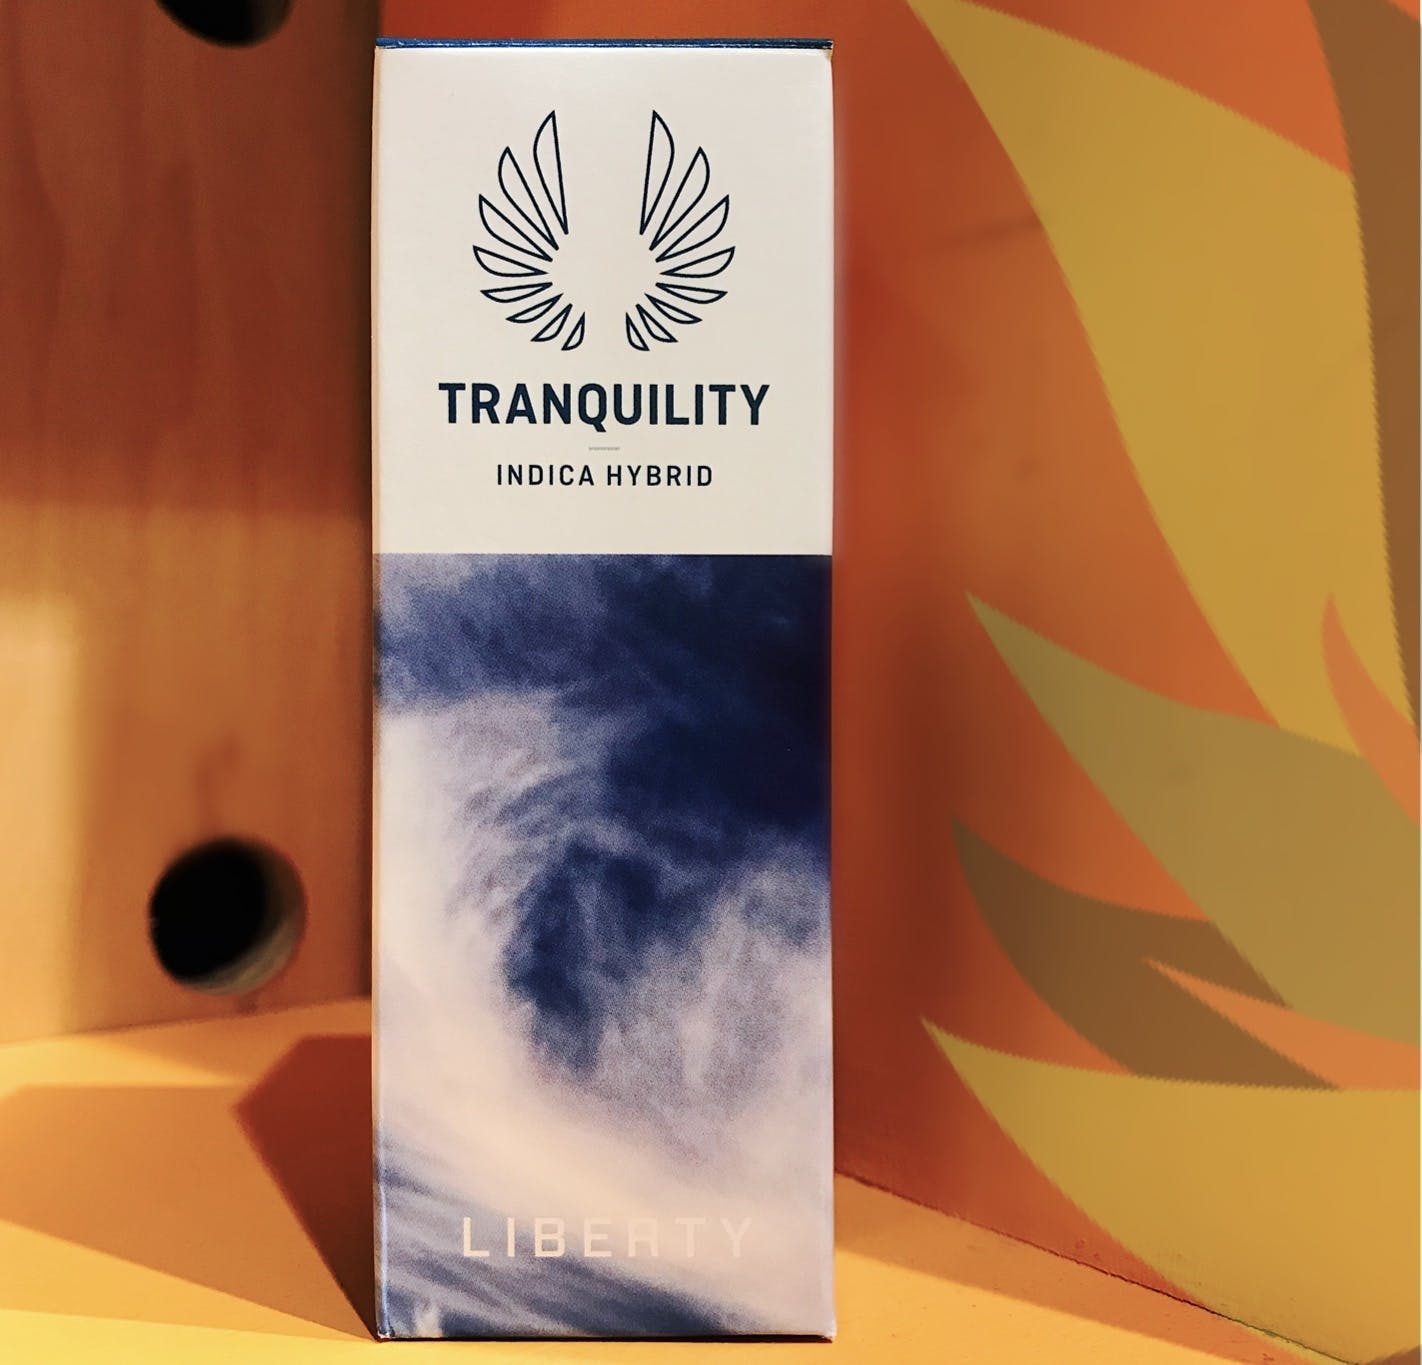 tincture-tranquility-tincture-from-liberty